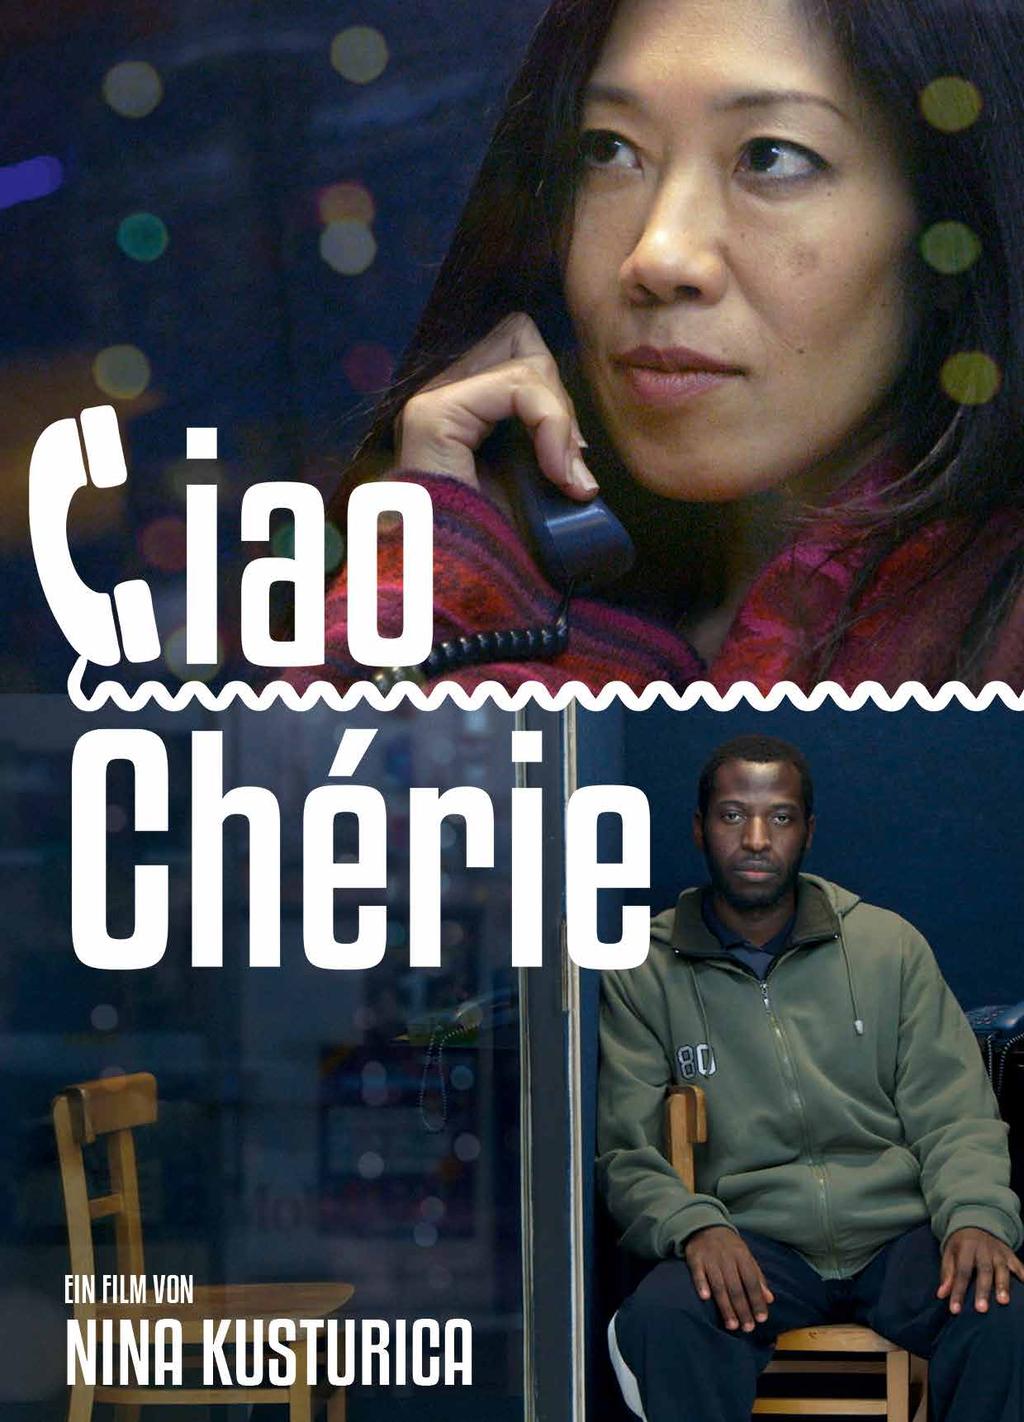 CIAO CHÉRIE Digital screening starts on 27th May at 17:00 Available for 7 days Cinematheque Tel Aviv Code: VOD2020 Nina Kusturica 2017 Language: Local languages; Hebrew subtitles 87 minutes C iao